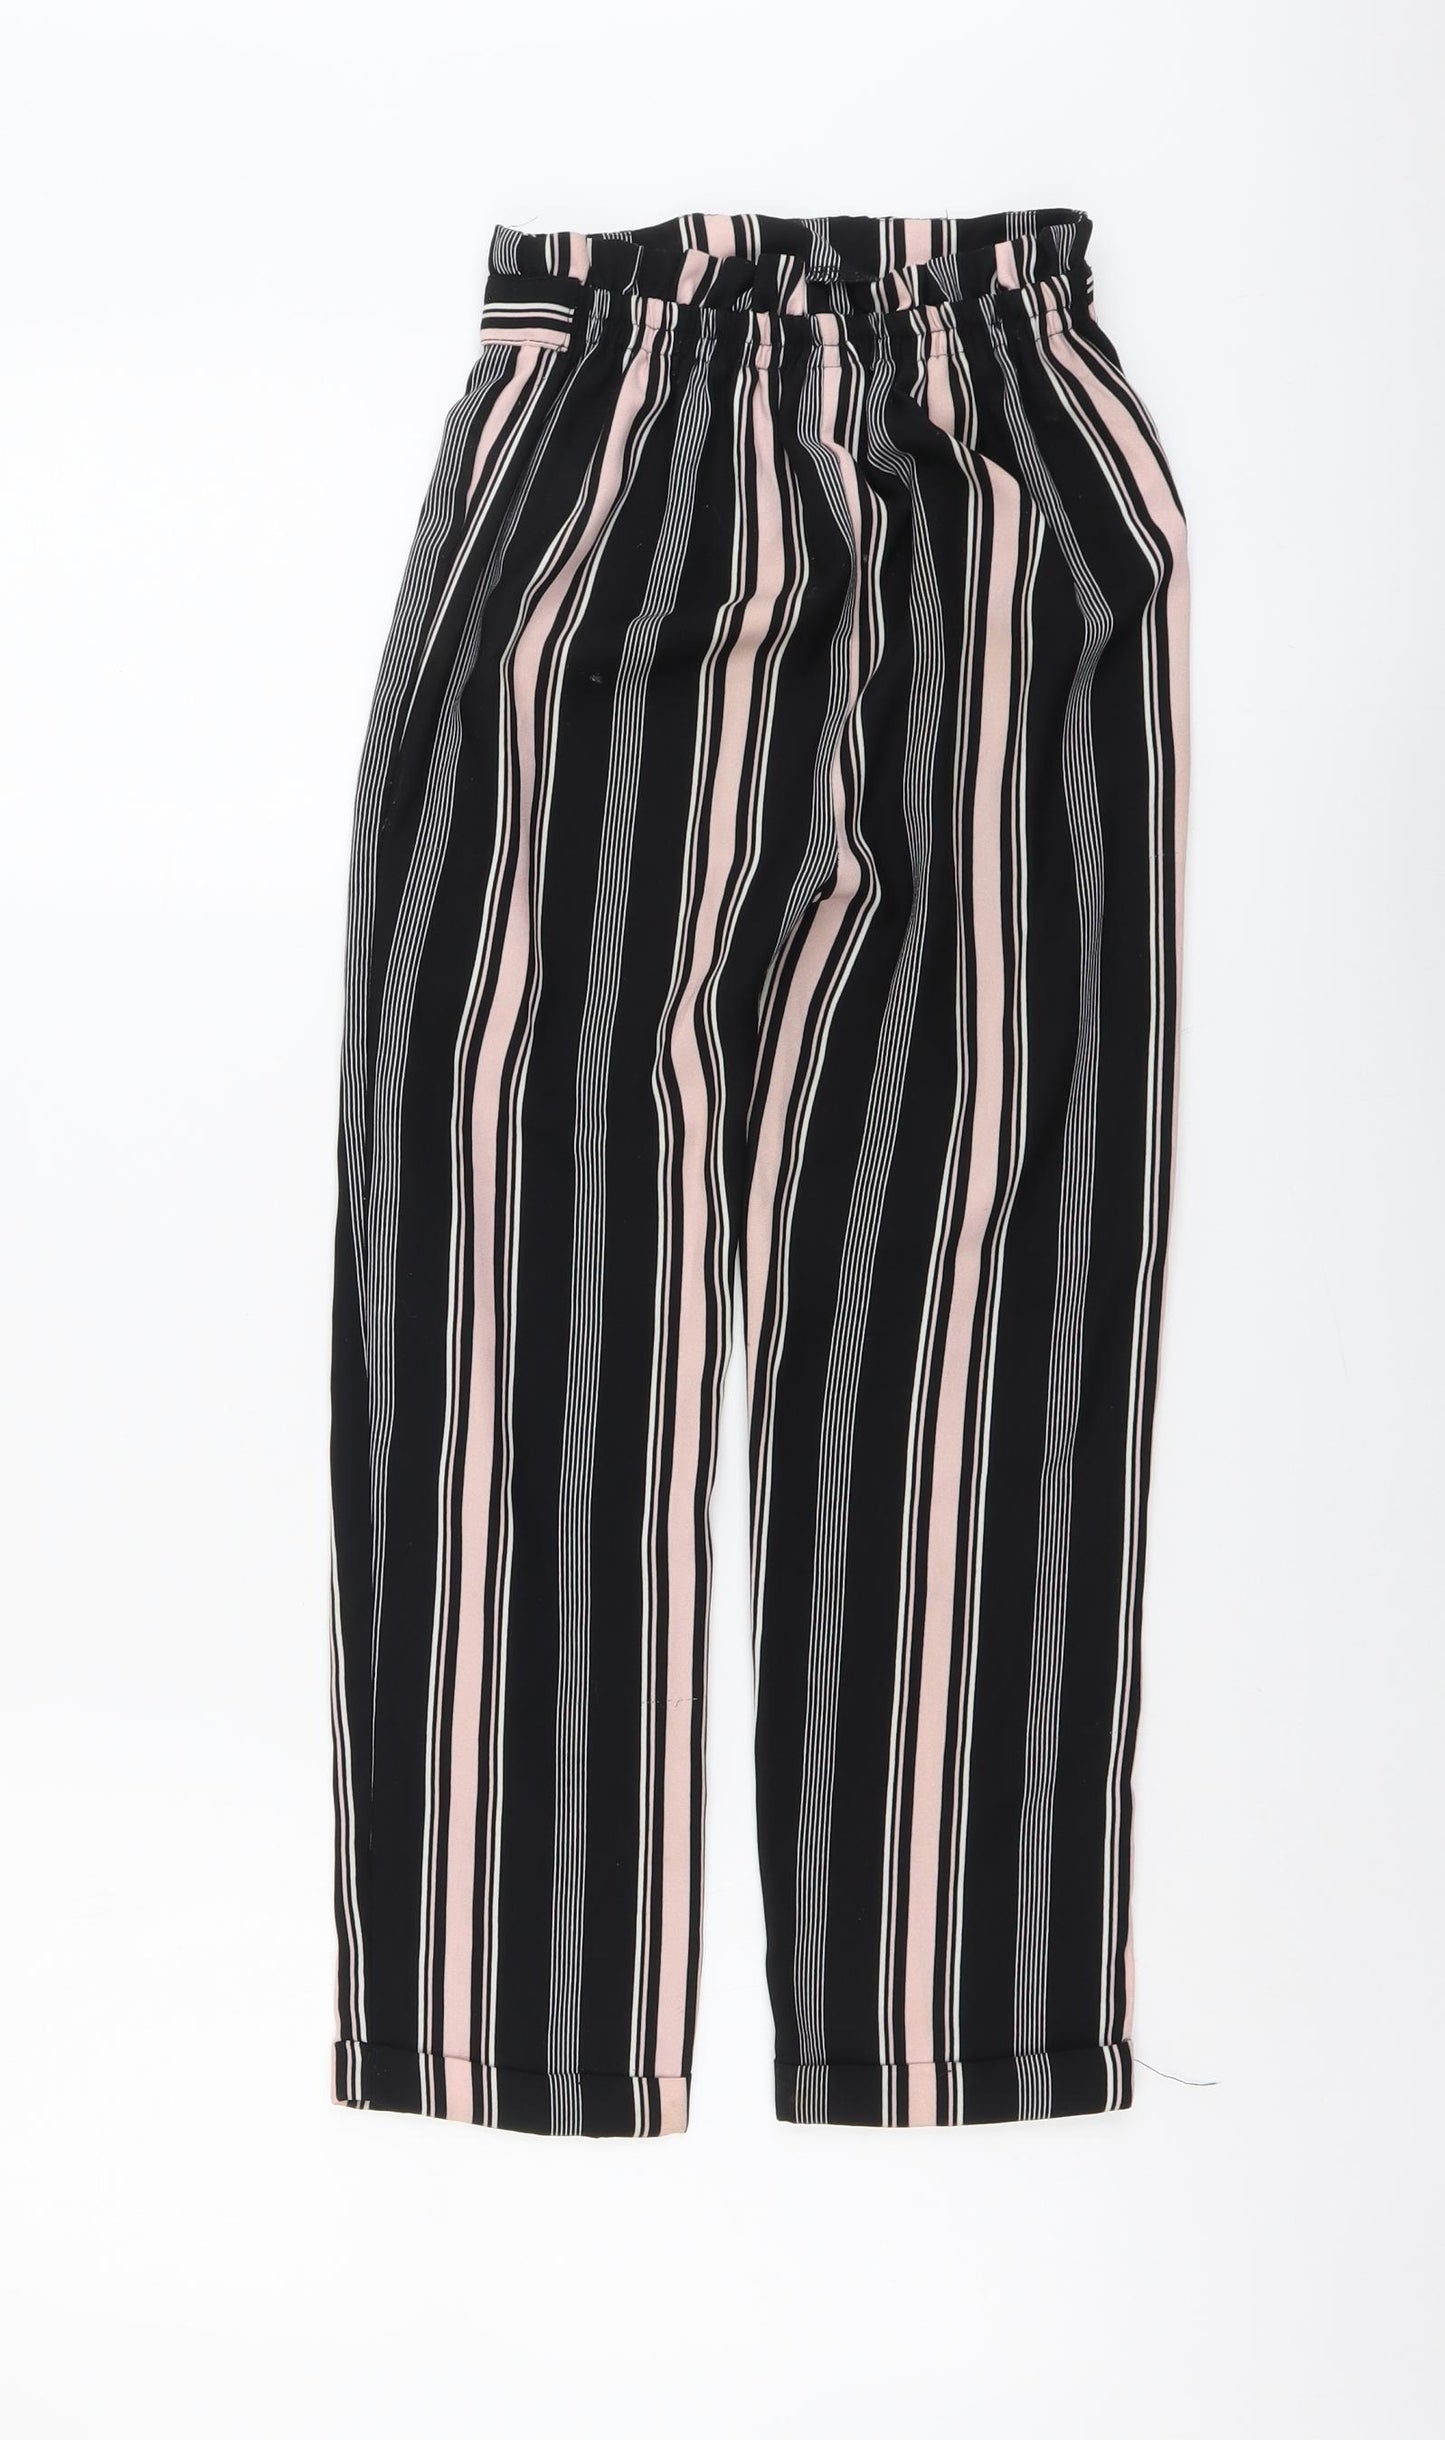 Firetrap Girls Black Striped Polyester Carrot Trousers Size 9-10 Years Regular